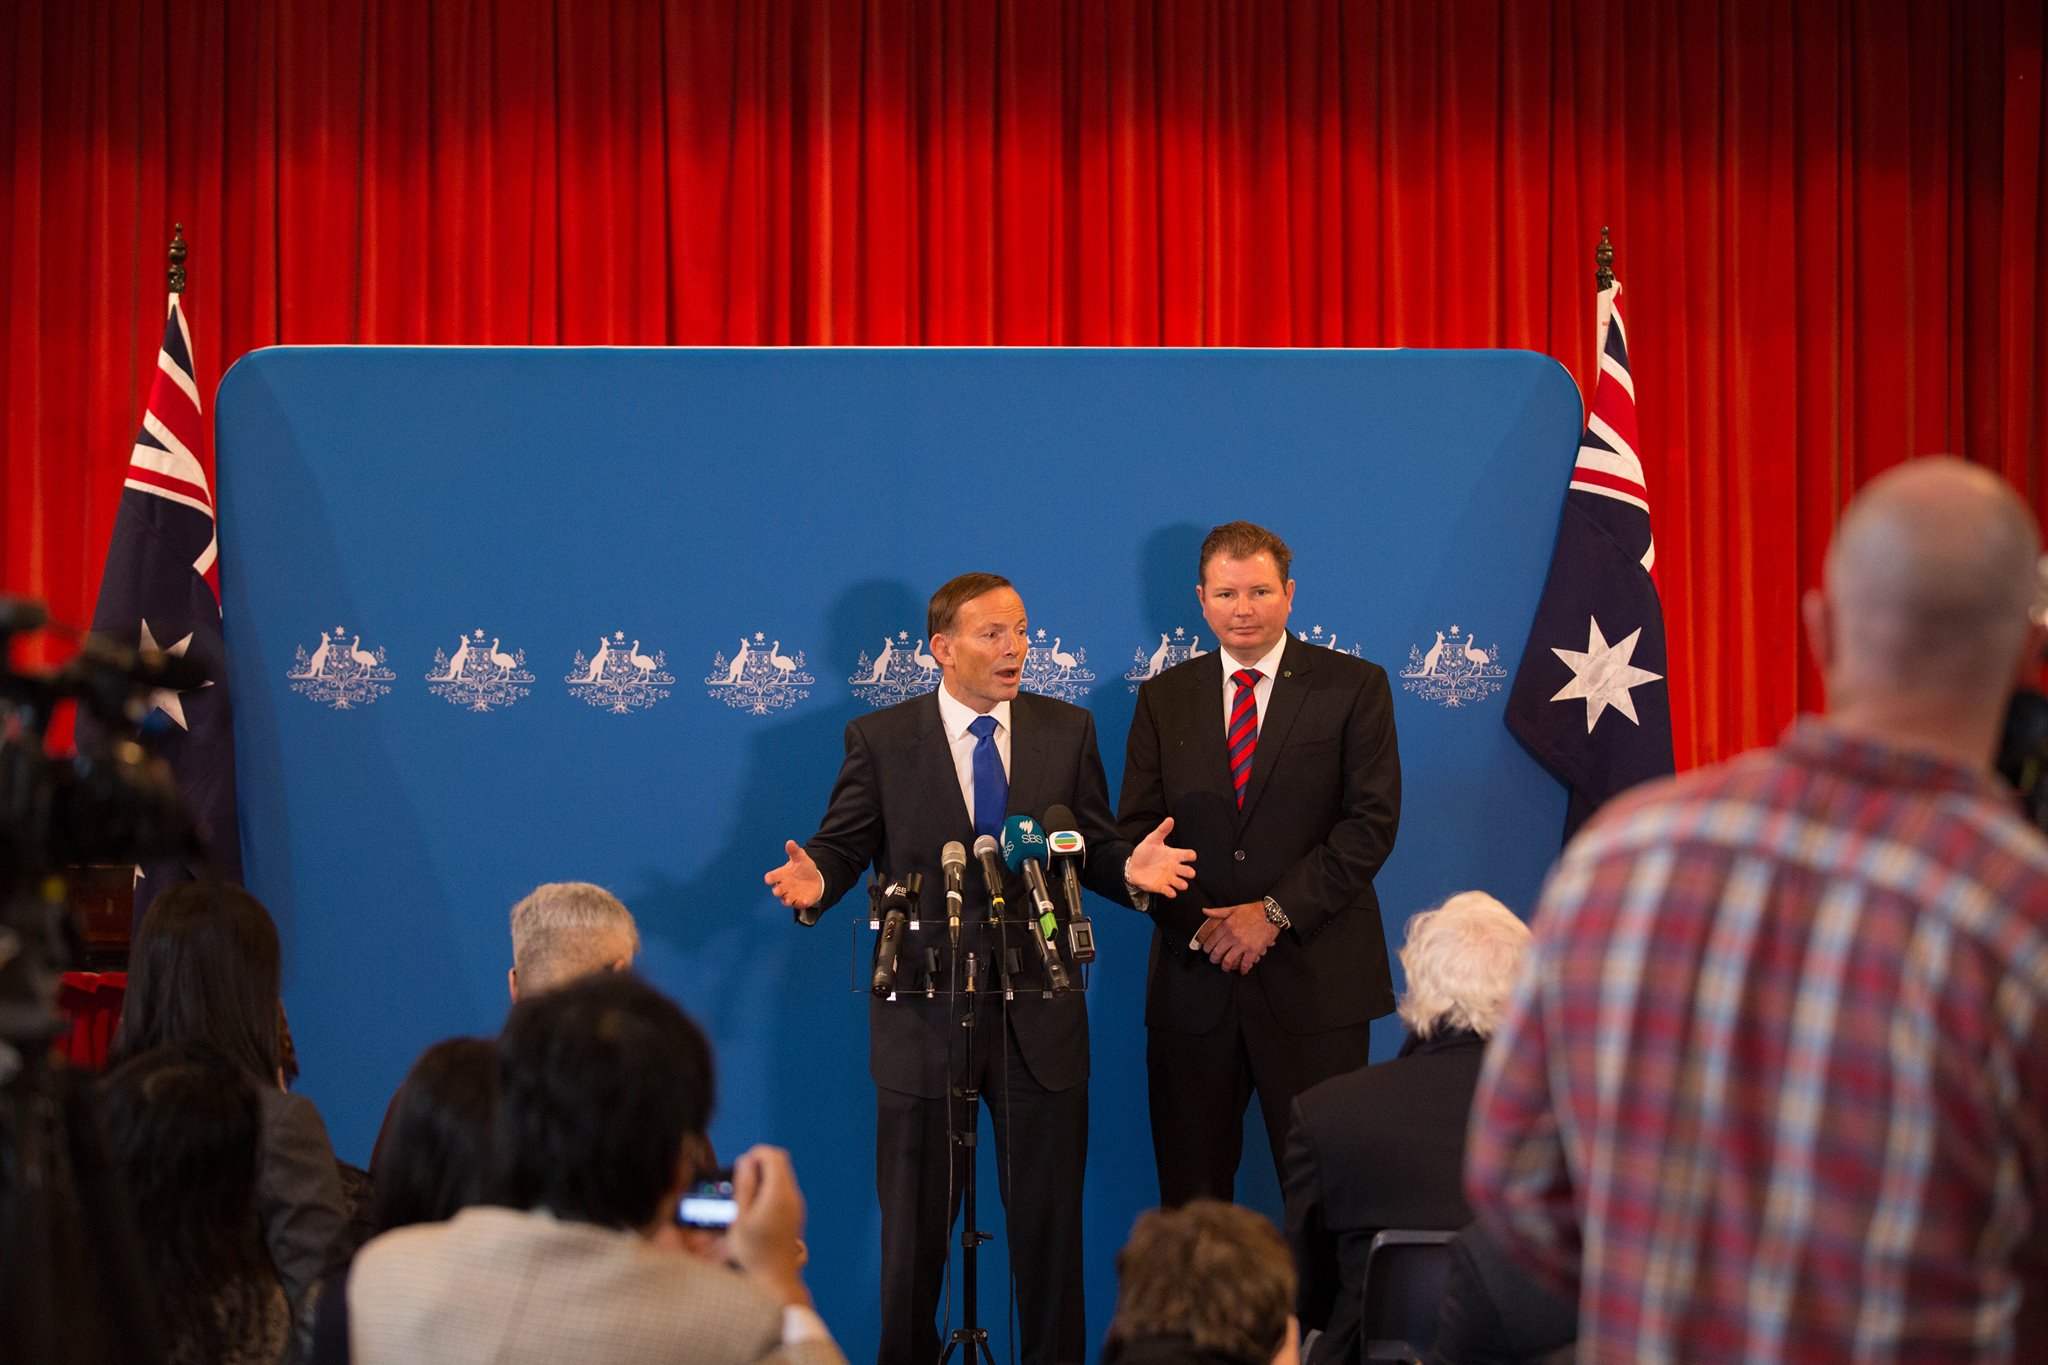 Prime Minister and Craig Laundy - Multicultural Press Conference